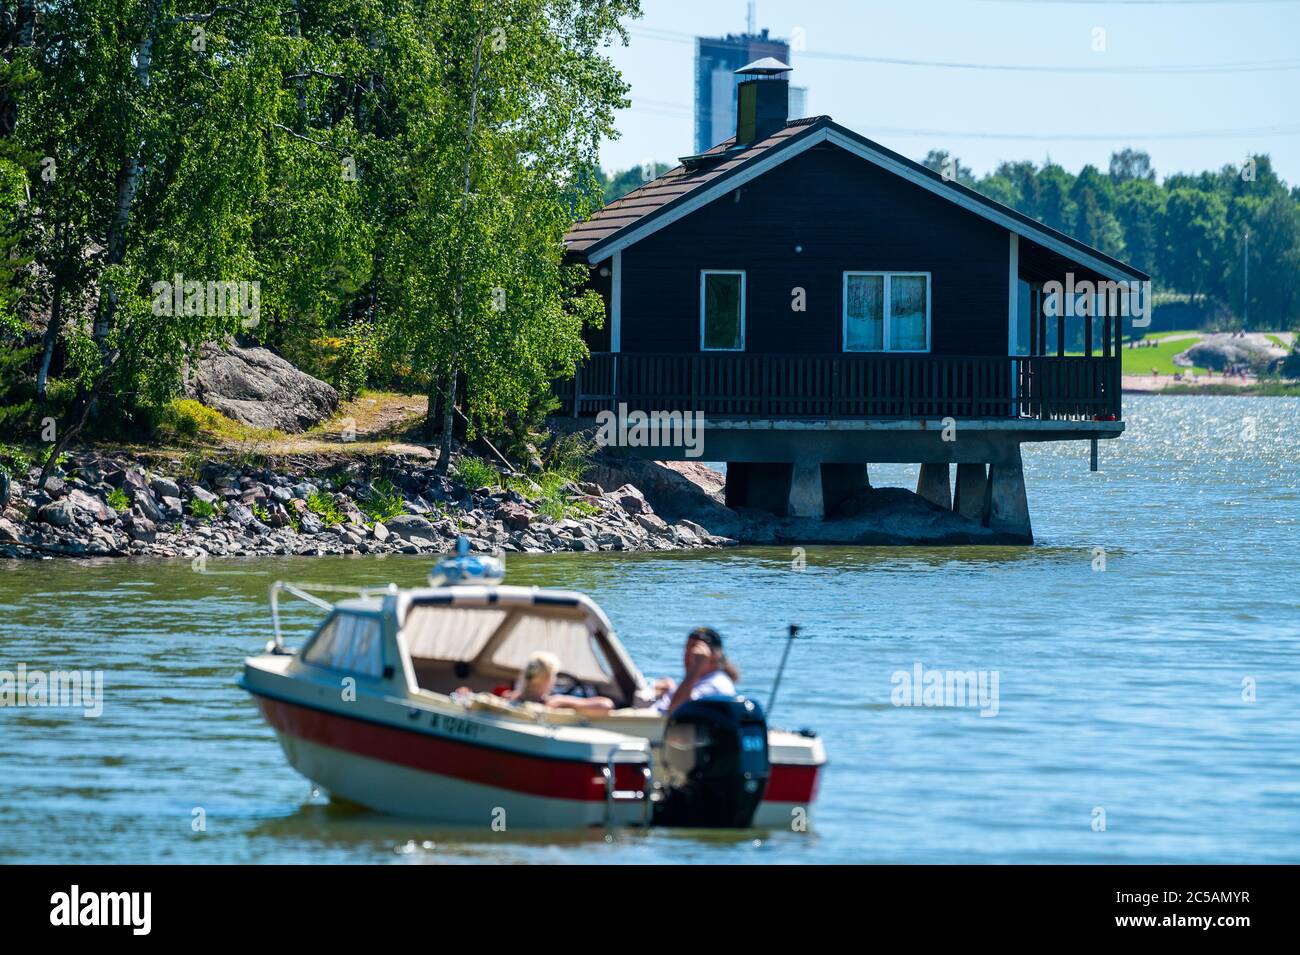 Helsinki / Finland - JUNE 21, 2020: An old wooden Finnish sauna building standing on top of the water. Stock Photo